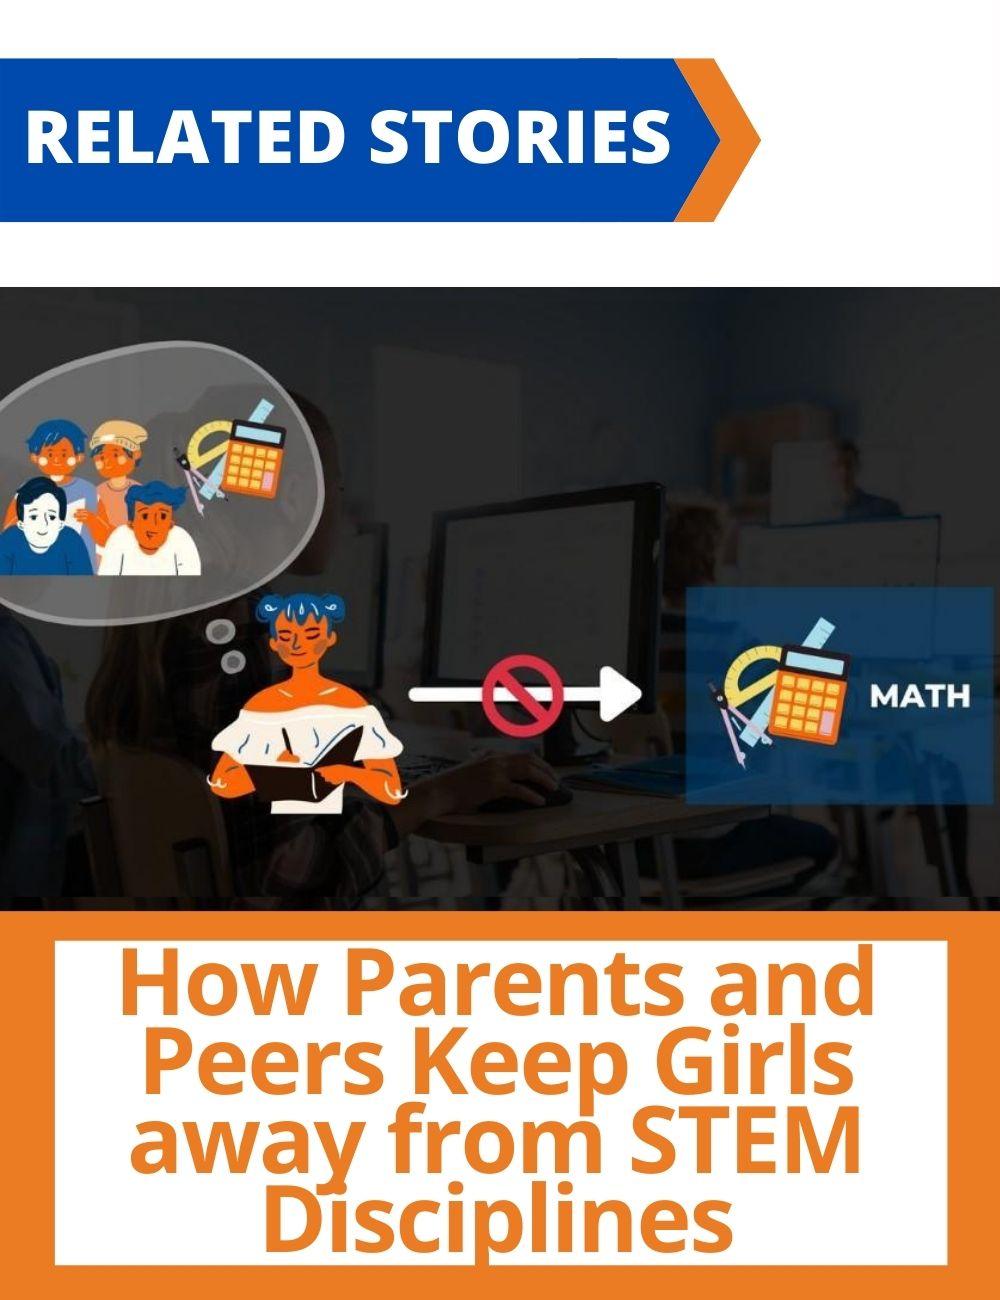 Link to related stories. Image: a girl is not choosing maths influenced by the opinion of the peers. Story headline: How Parents and Peers Keep Girls away from STEM Disciplines 